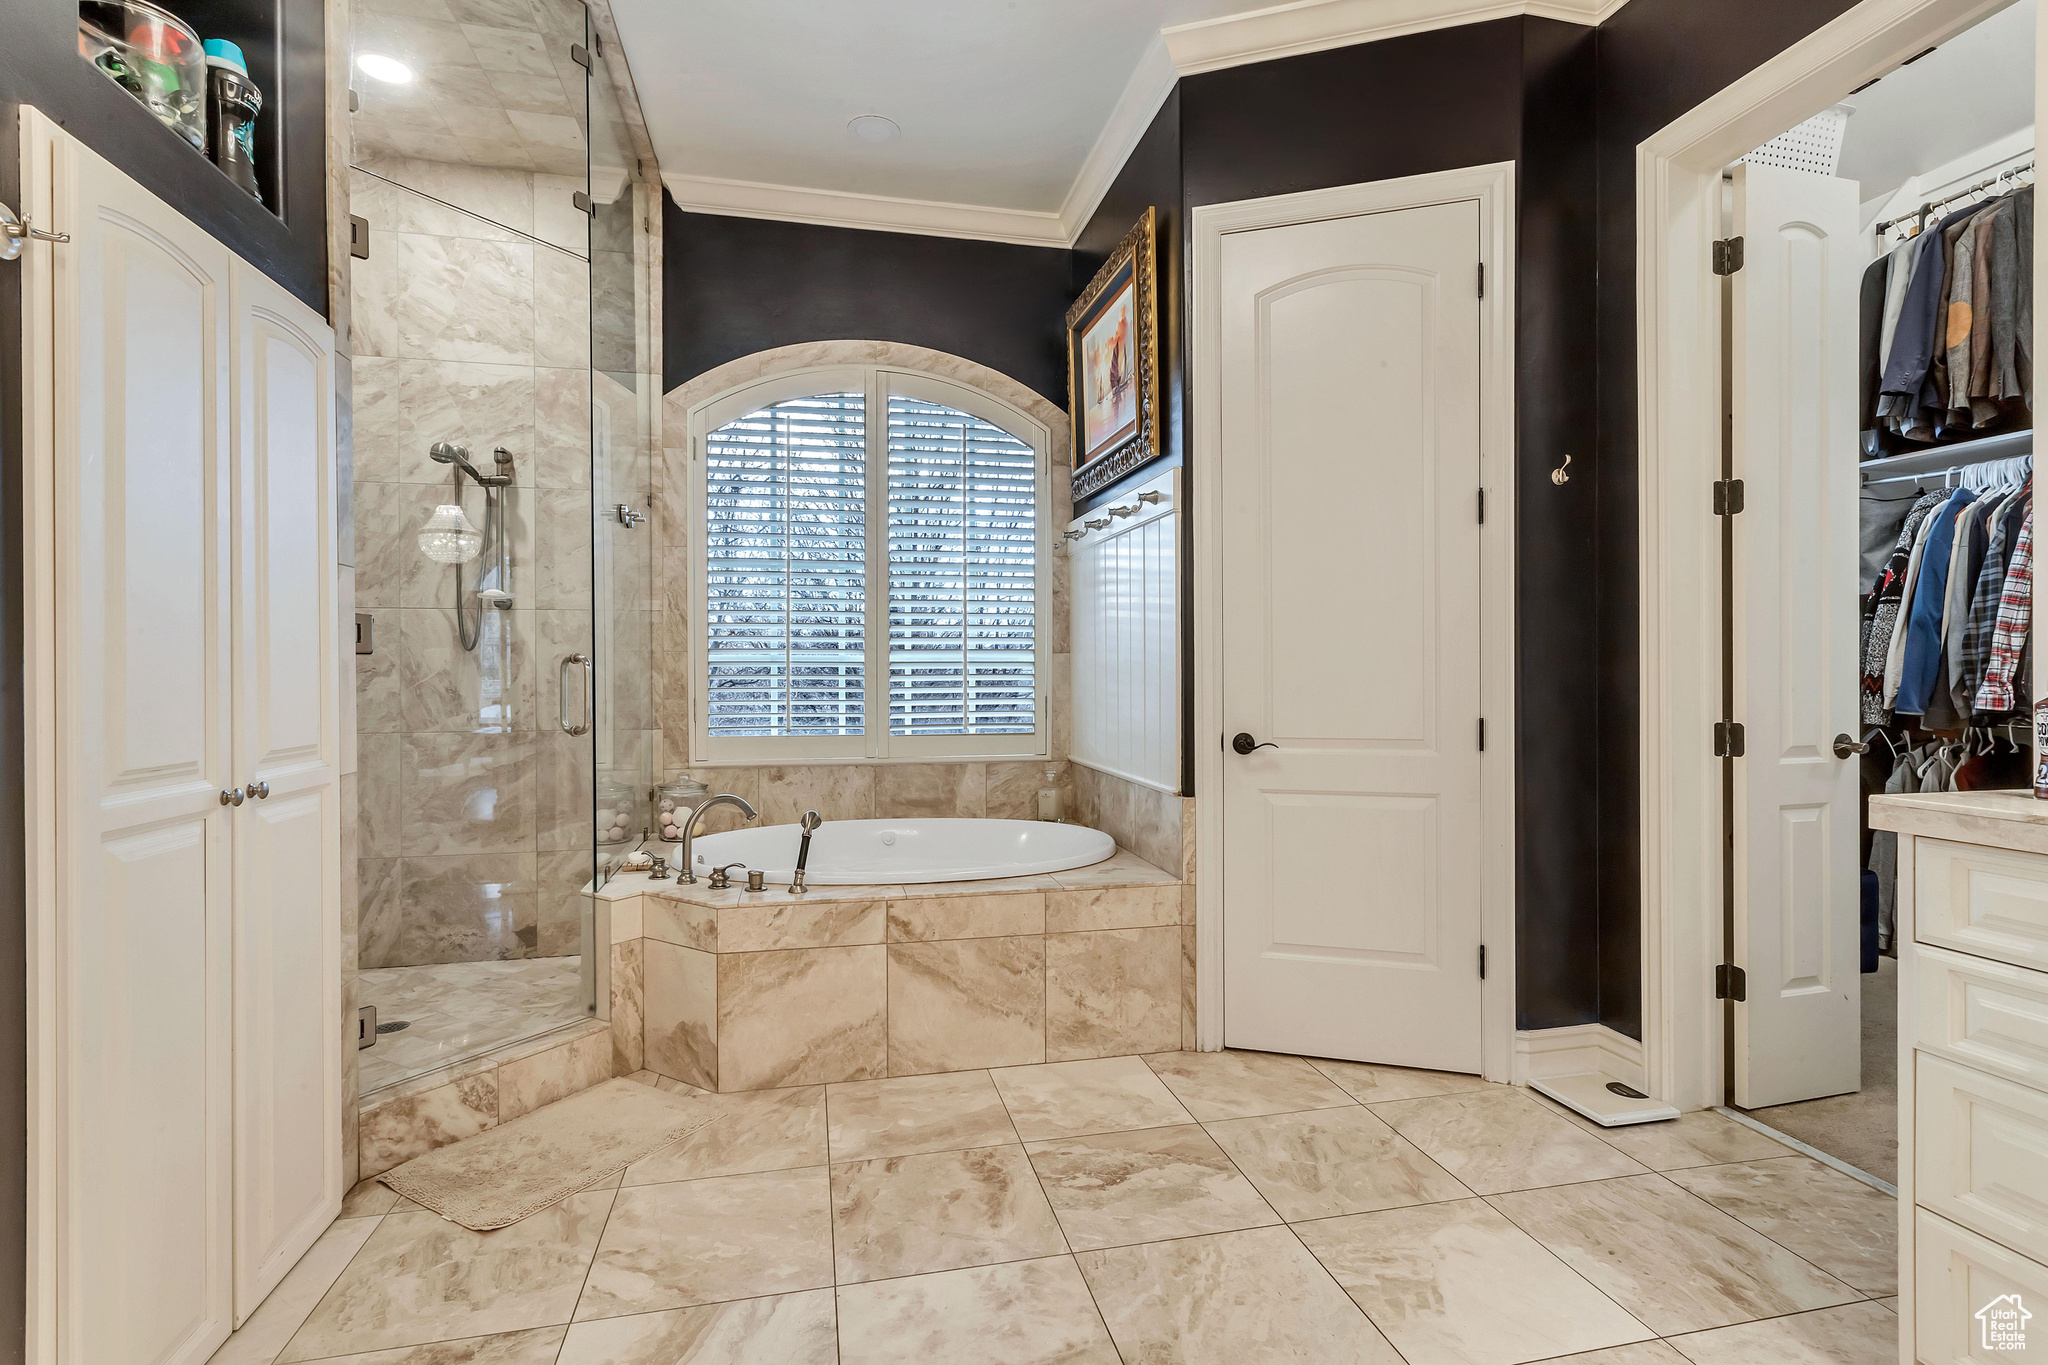 Bathroom featuring vanity, separate shower and tub, travertine floors, and crown molding